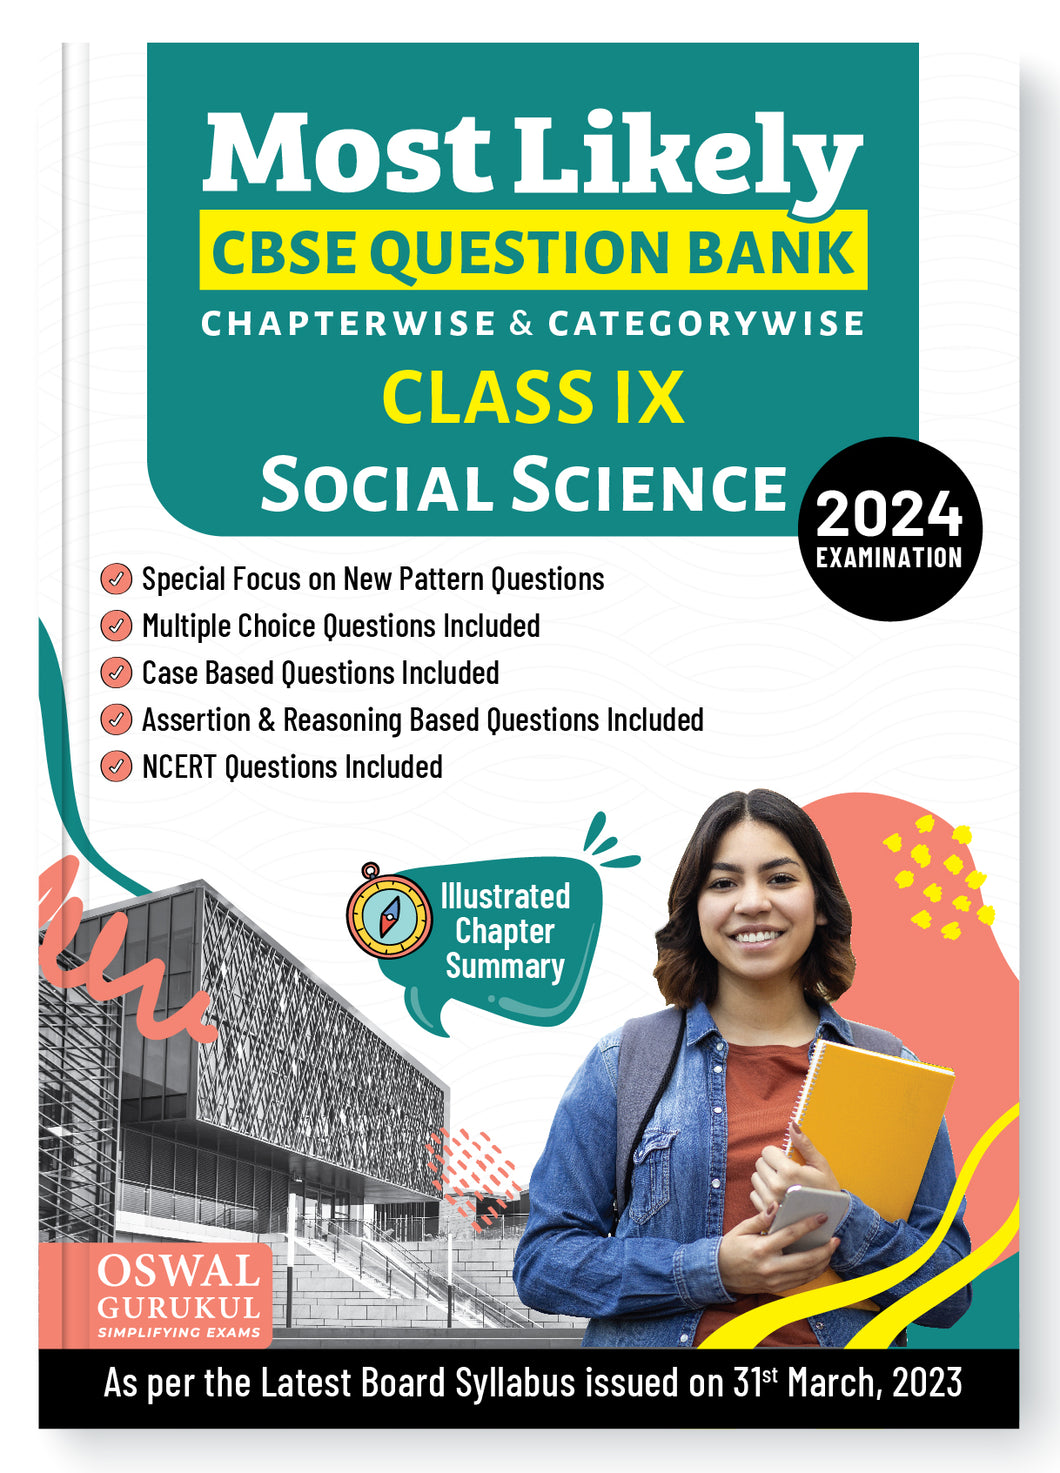 Oswal - Gurukul Social Science Most Likely Question Bank : CBSE Class 9 for Exam 2024